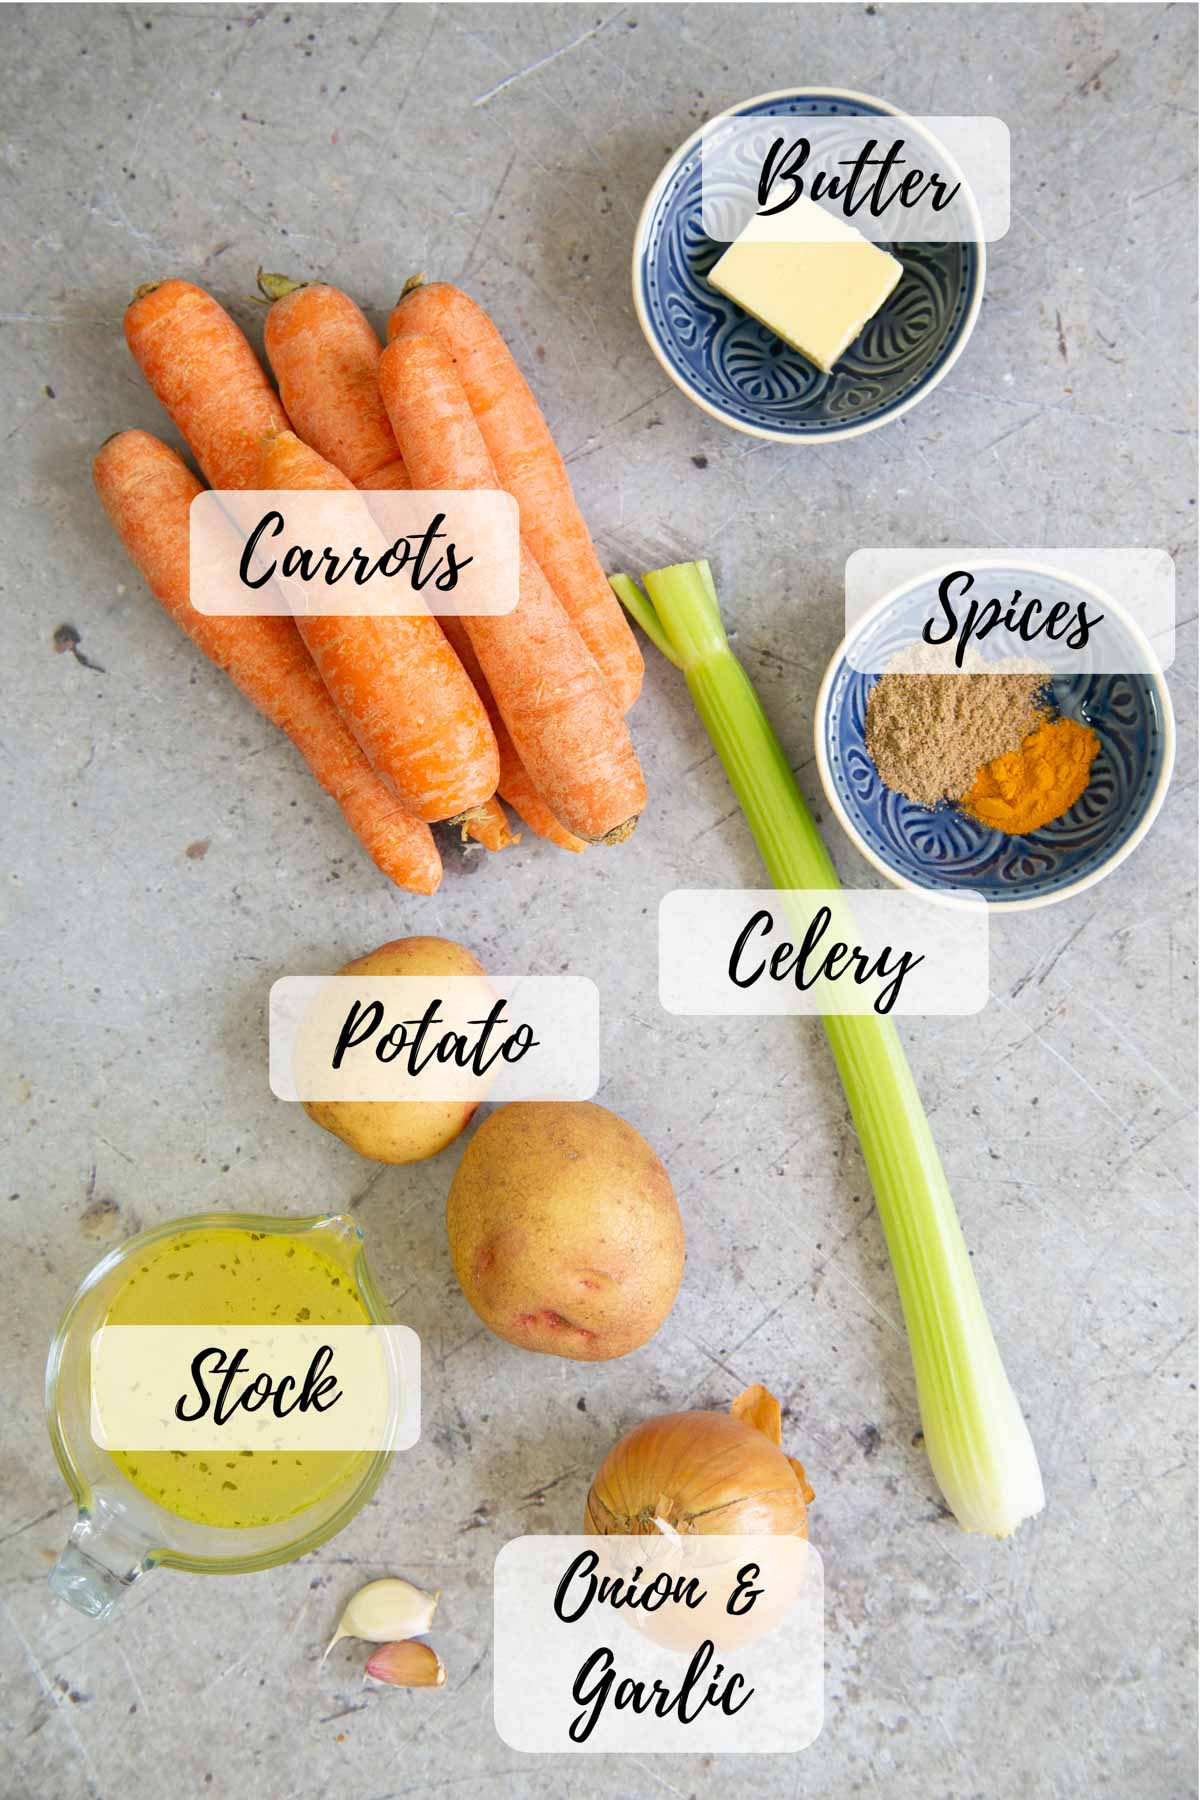 The ingredients: carrots, butter, spices, a celery stick, onion and garlic, potato, stock